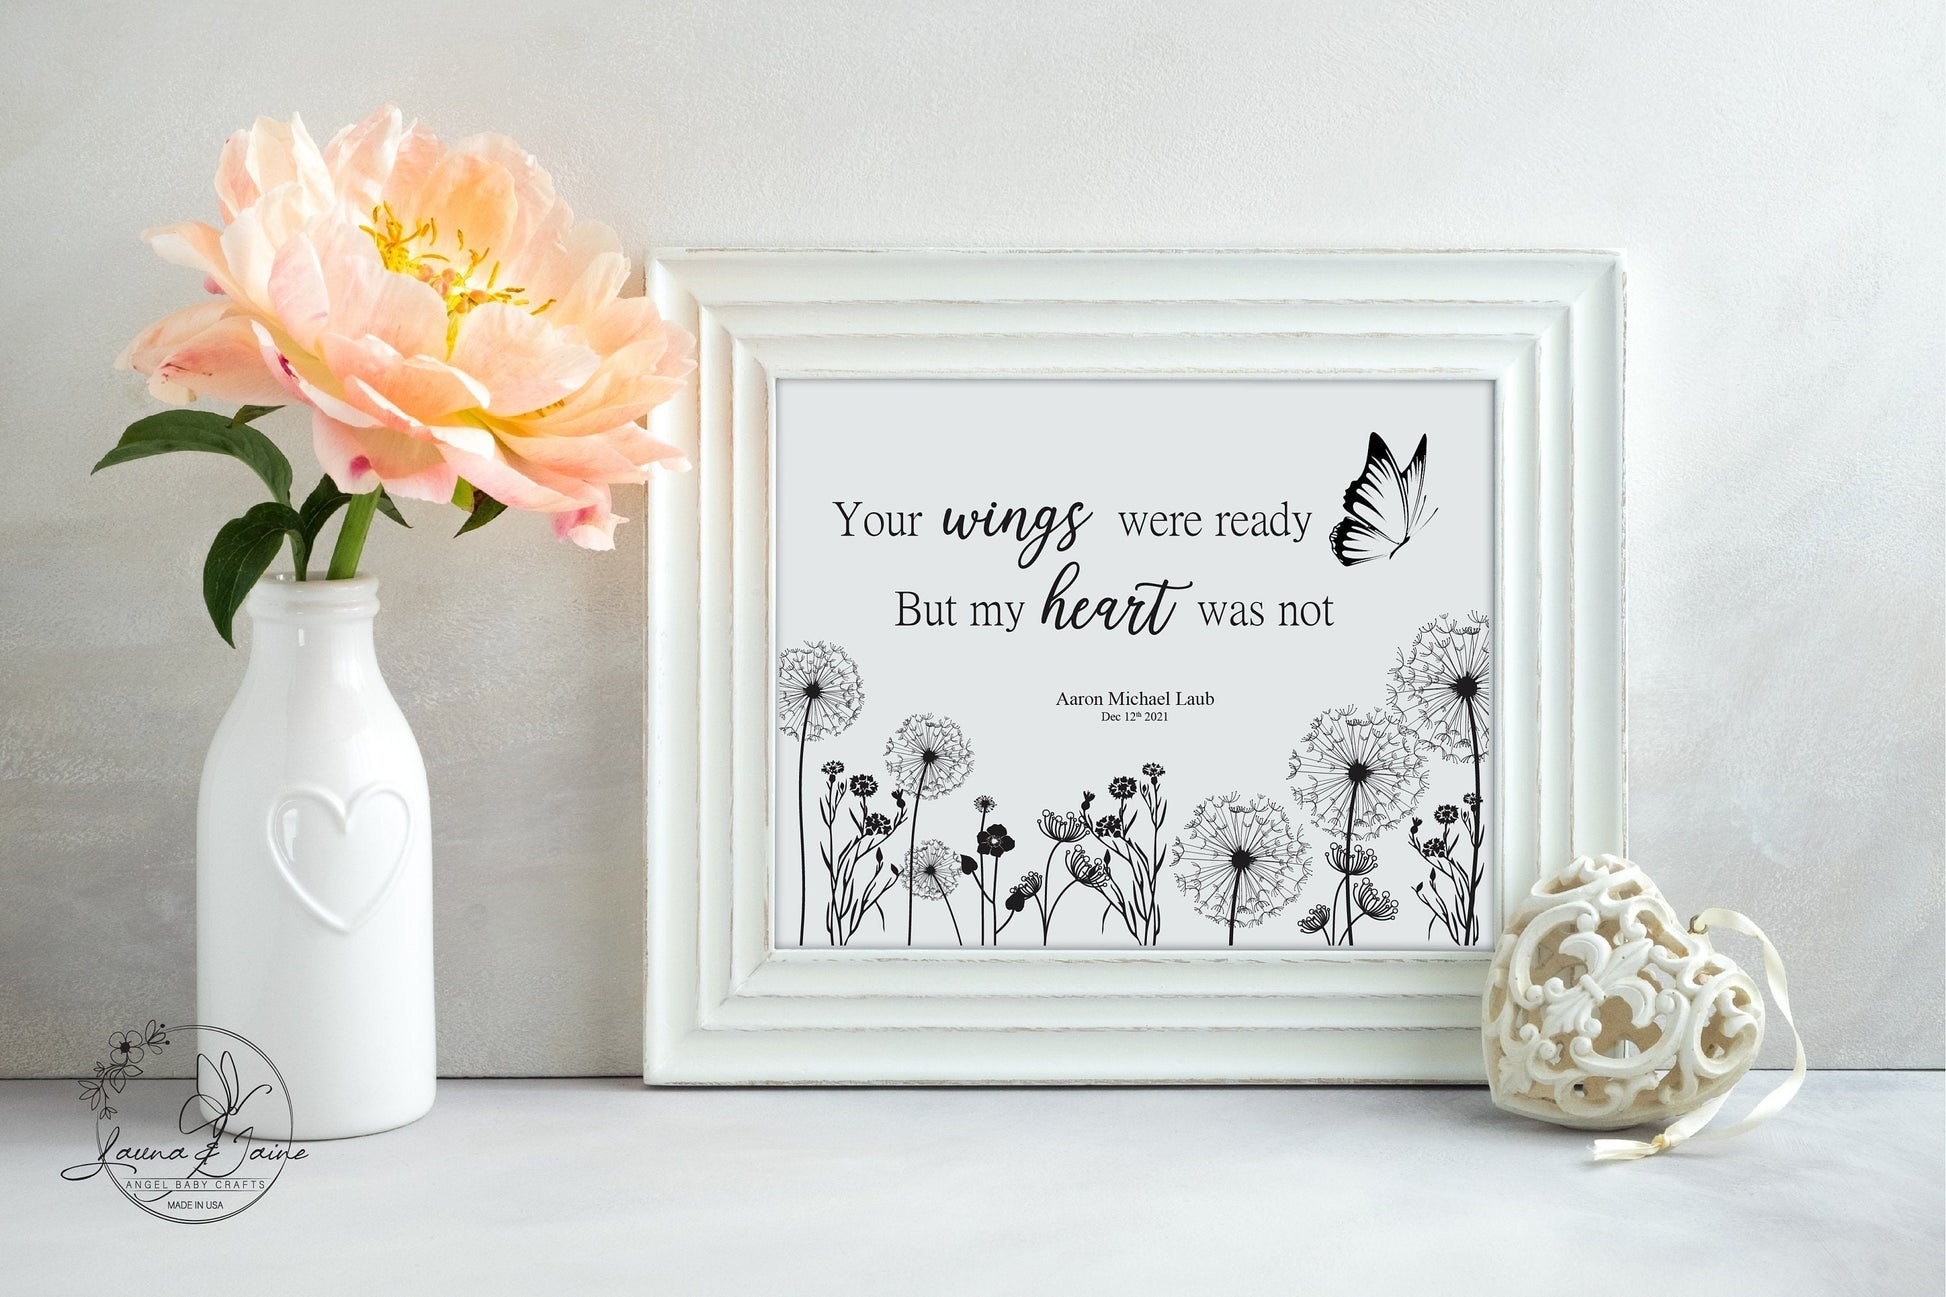 Your wings were ready - Personalized Angel Baby Sympathy Gift, Infant Loss, Miscarriage Memorial Print, Digital Download